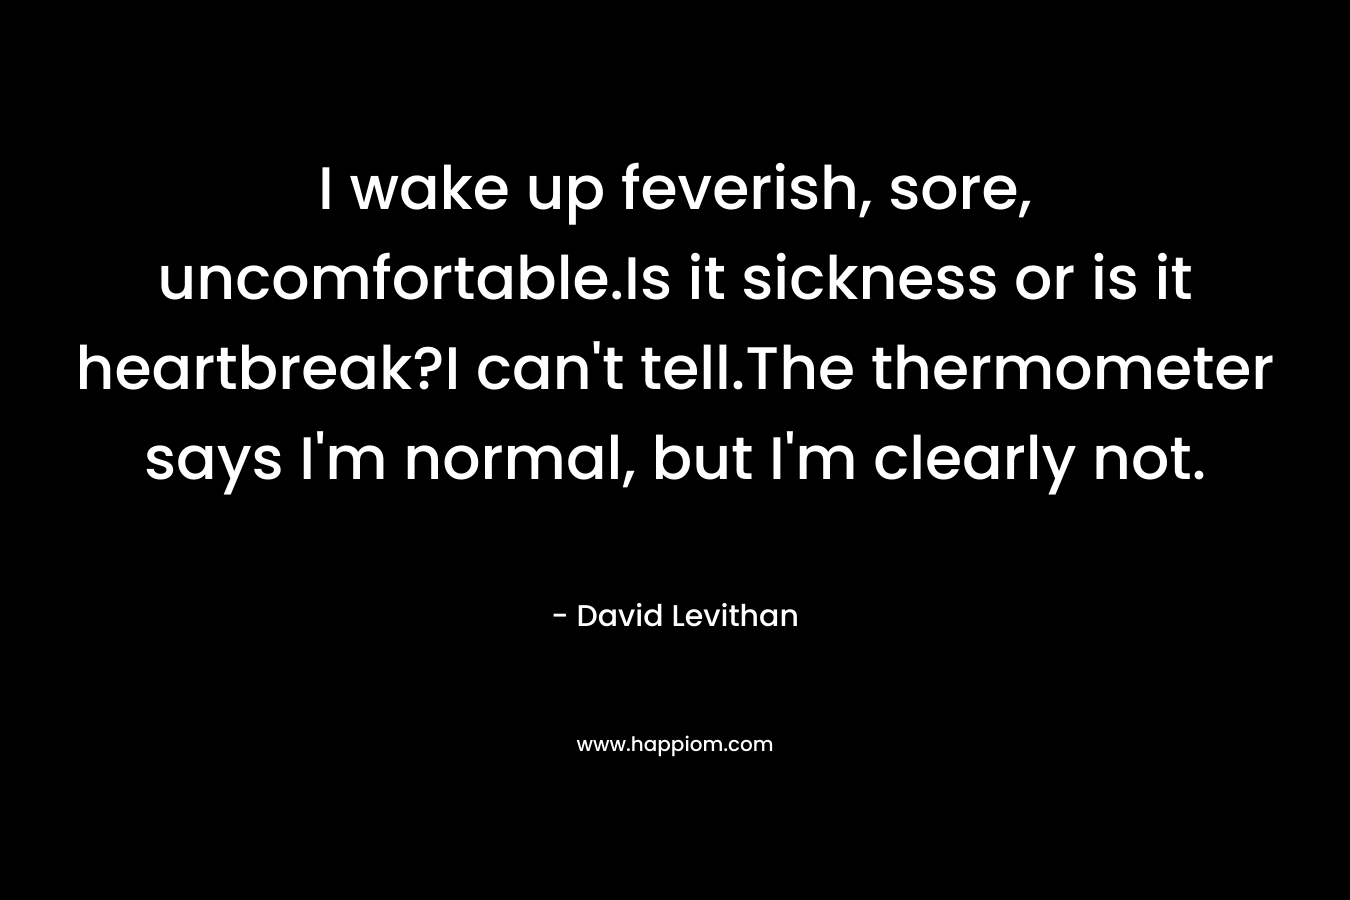 I wake up feverish, sore, uncomfortable.Is it sickness or is it heartbreak?I can’t tell.The thermometer says I’m normal, but I’m clearly not. – David Levithan